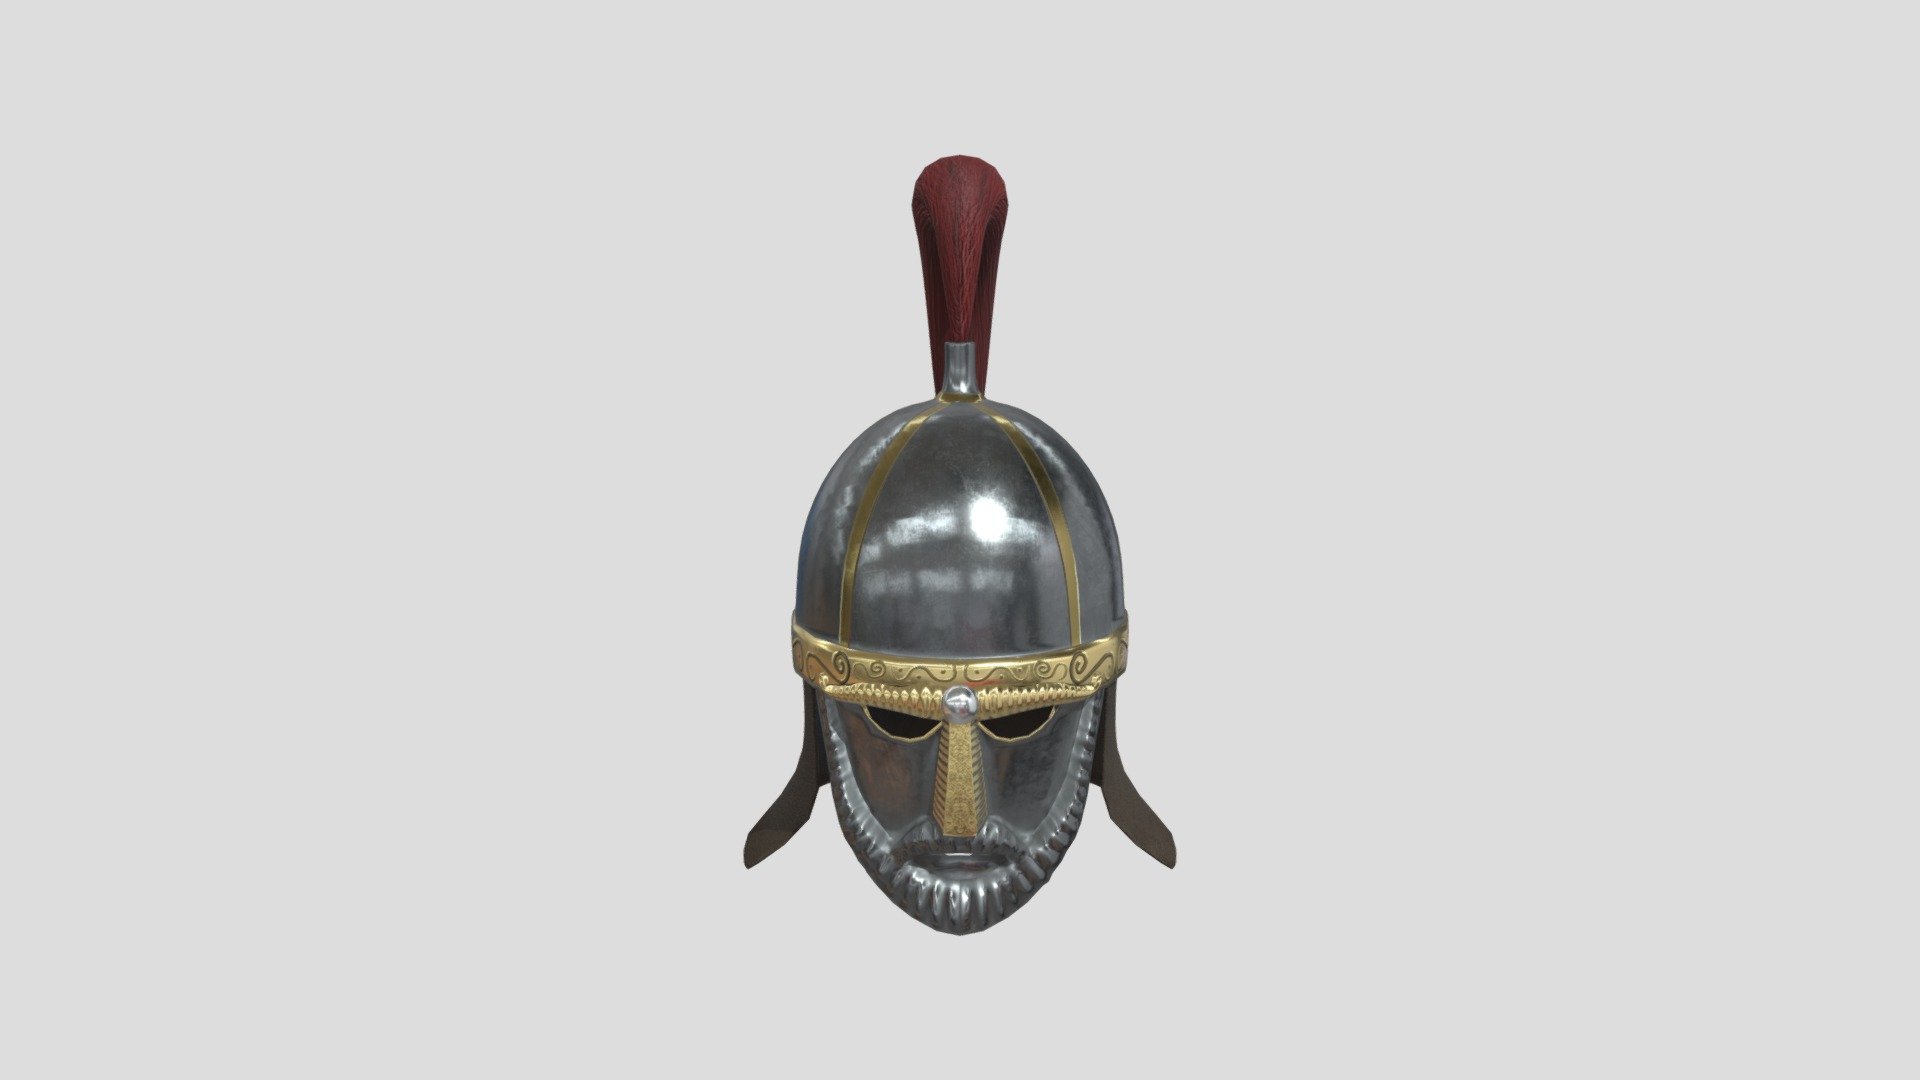 Medieval helmet with decorative face mask - Medieval helmet bearded mask - 3D model by Shaund (@something.sd40) 3d model